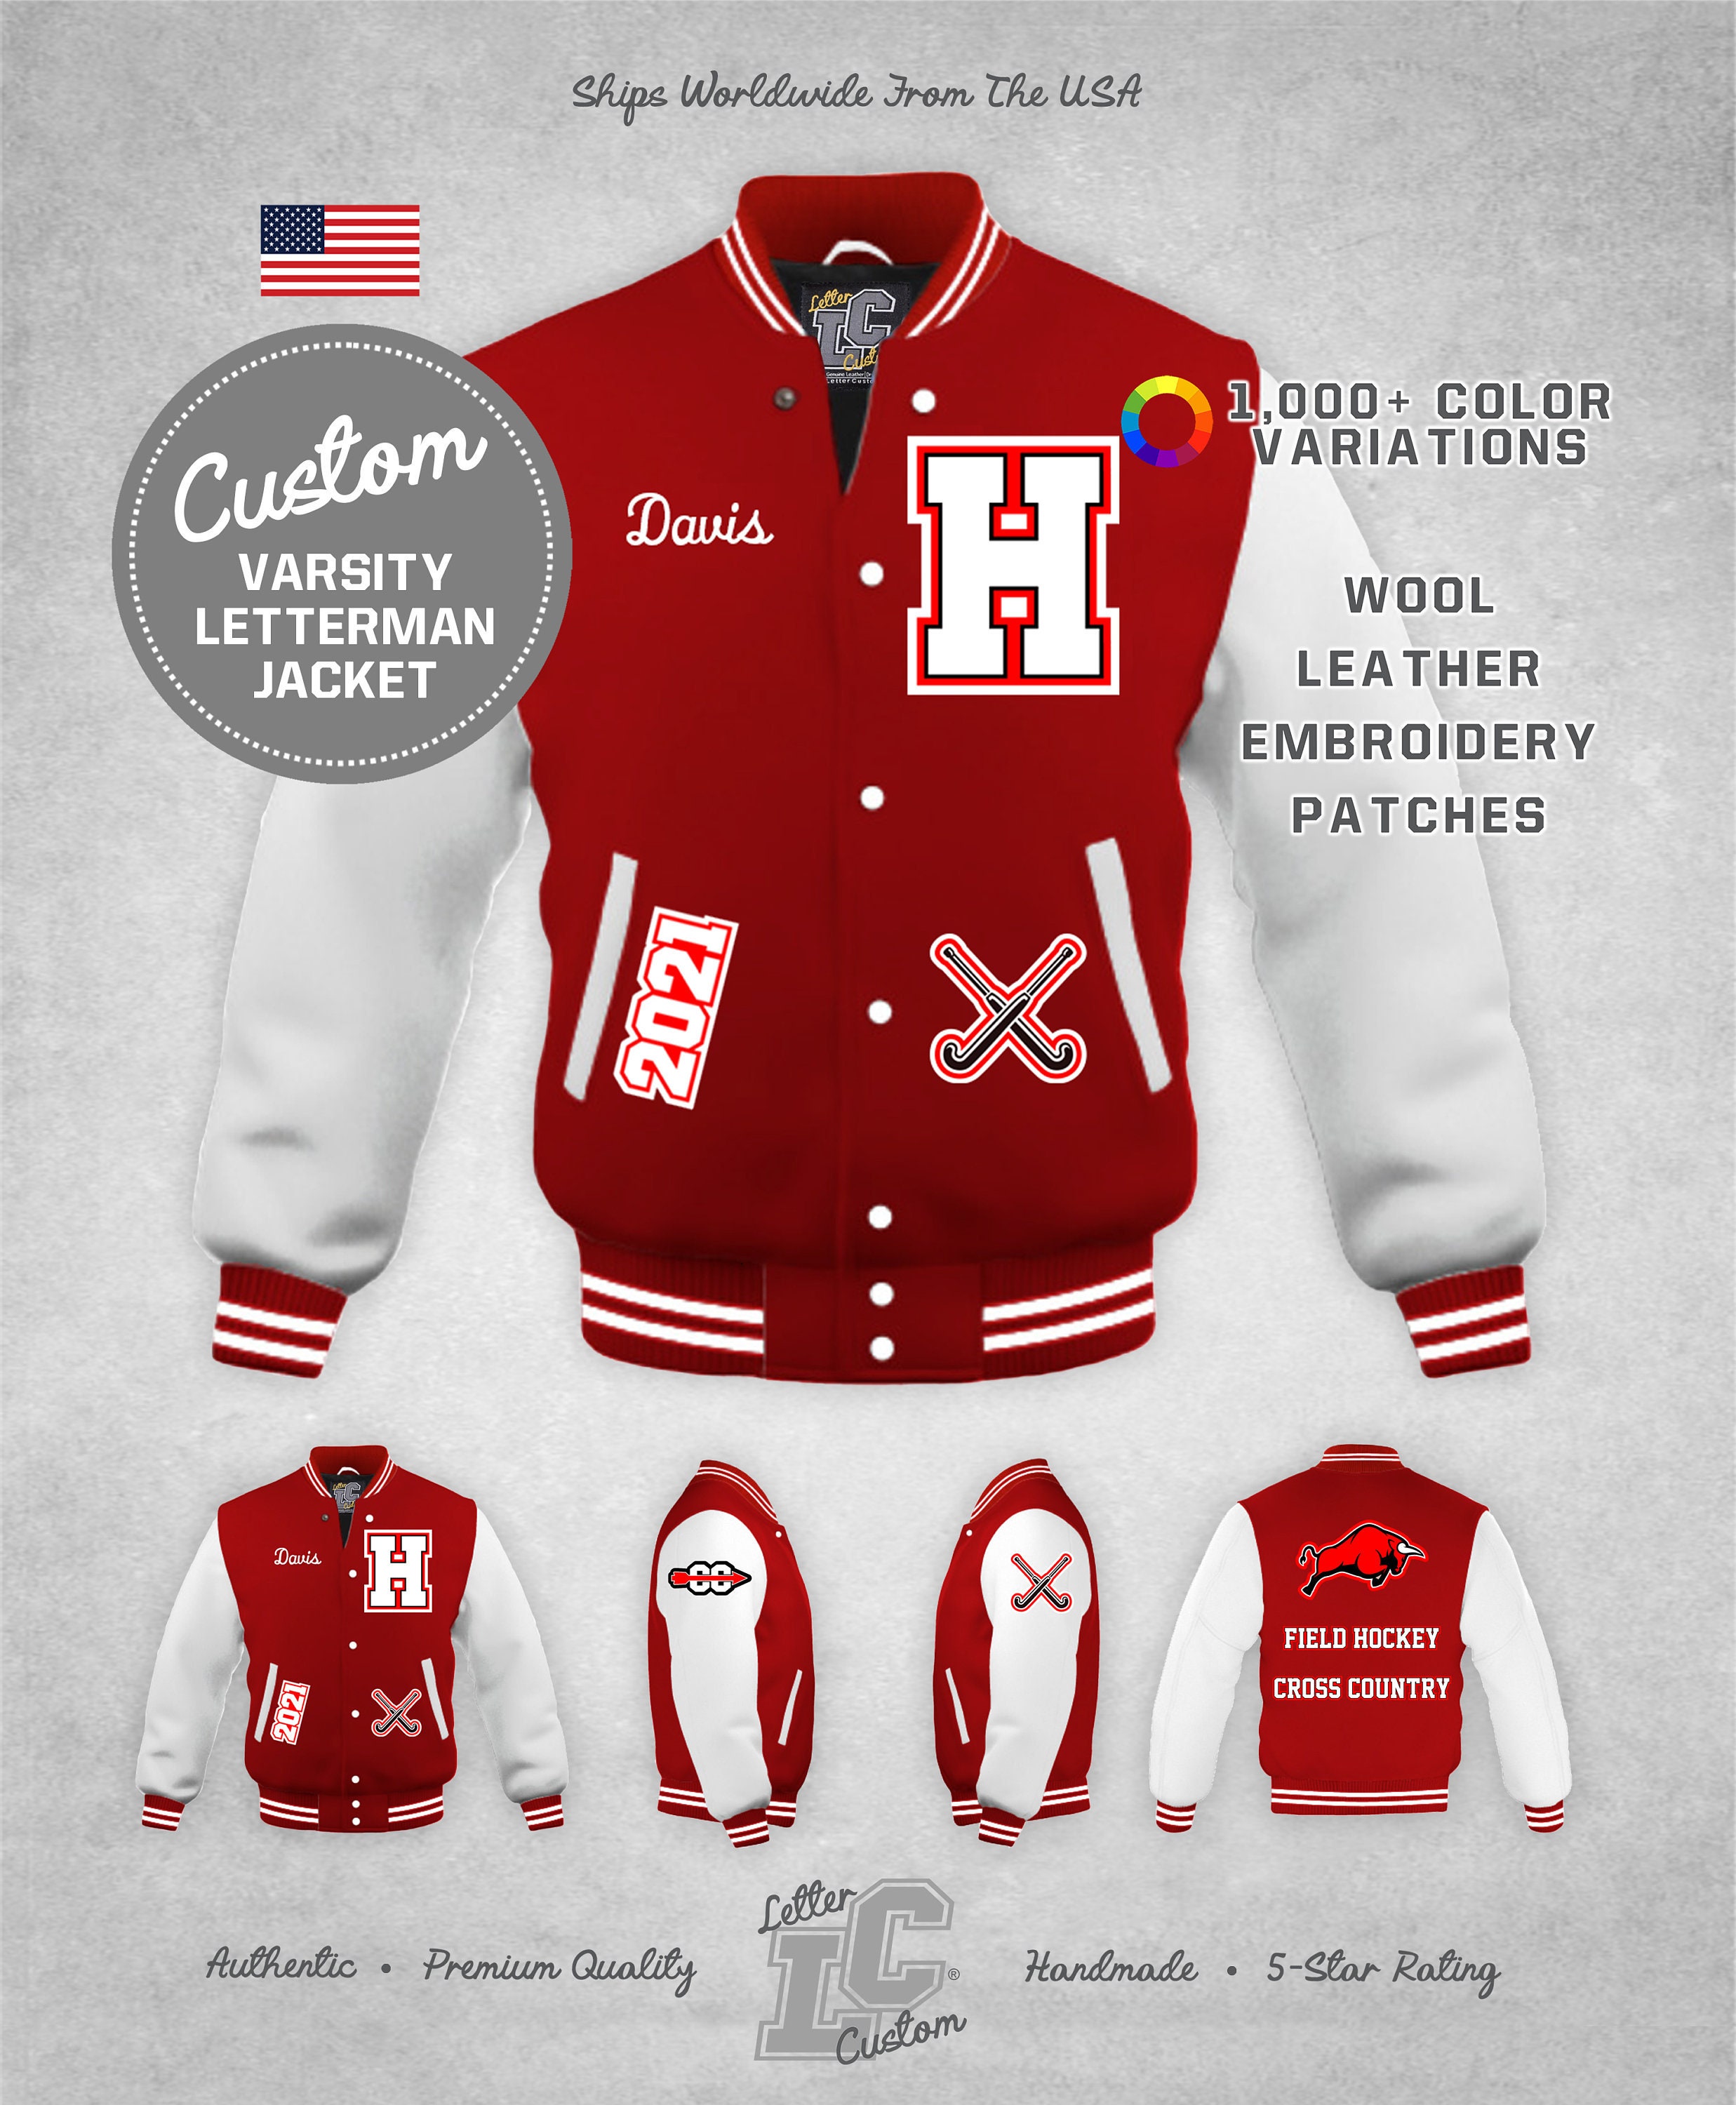 Loose Sleeve Patch – Herff Jones- The Roderick Group Letterman Jackets